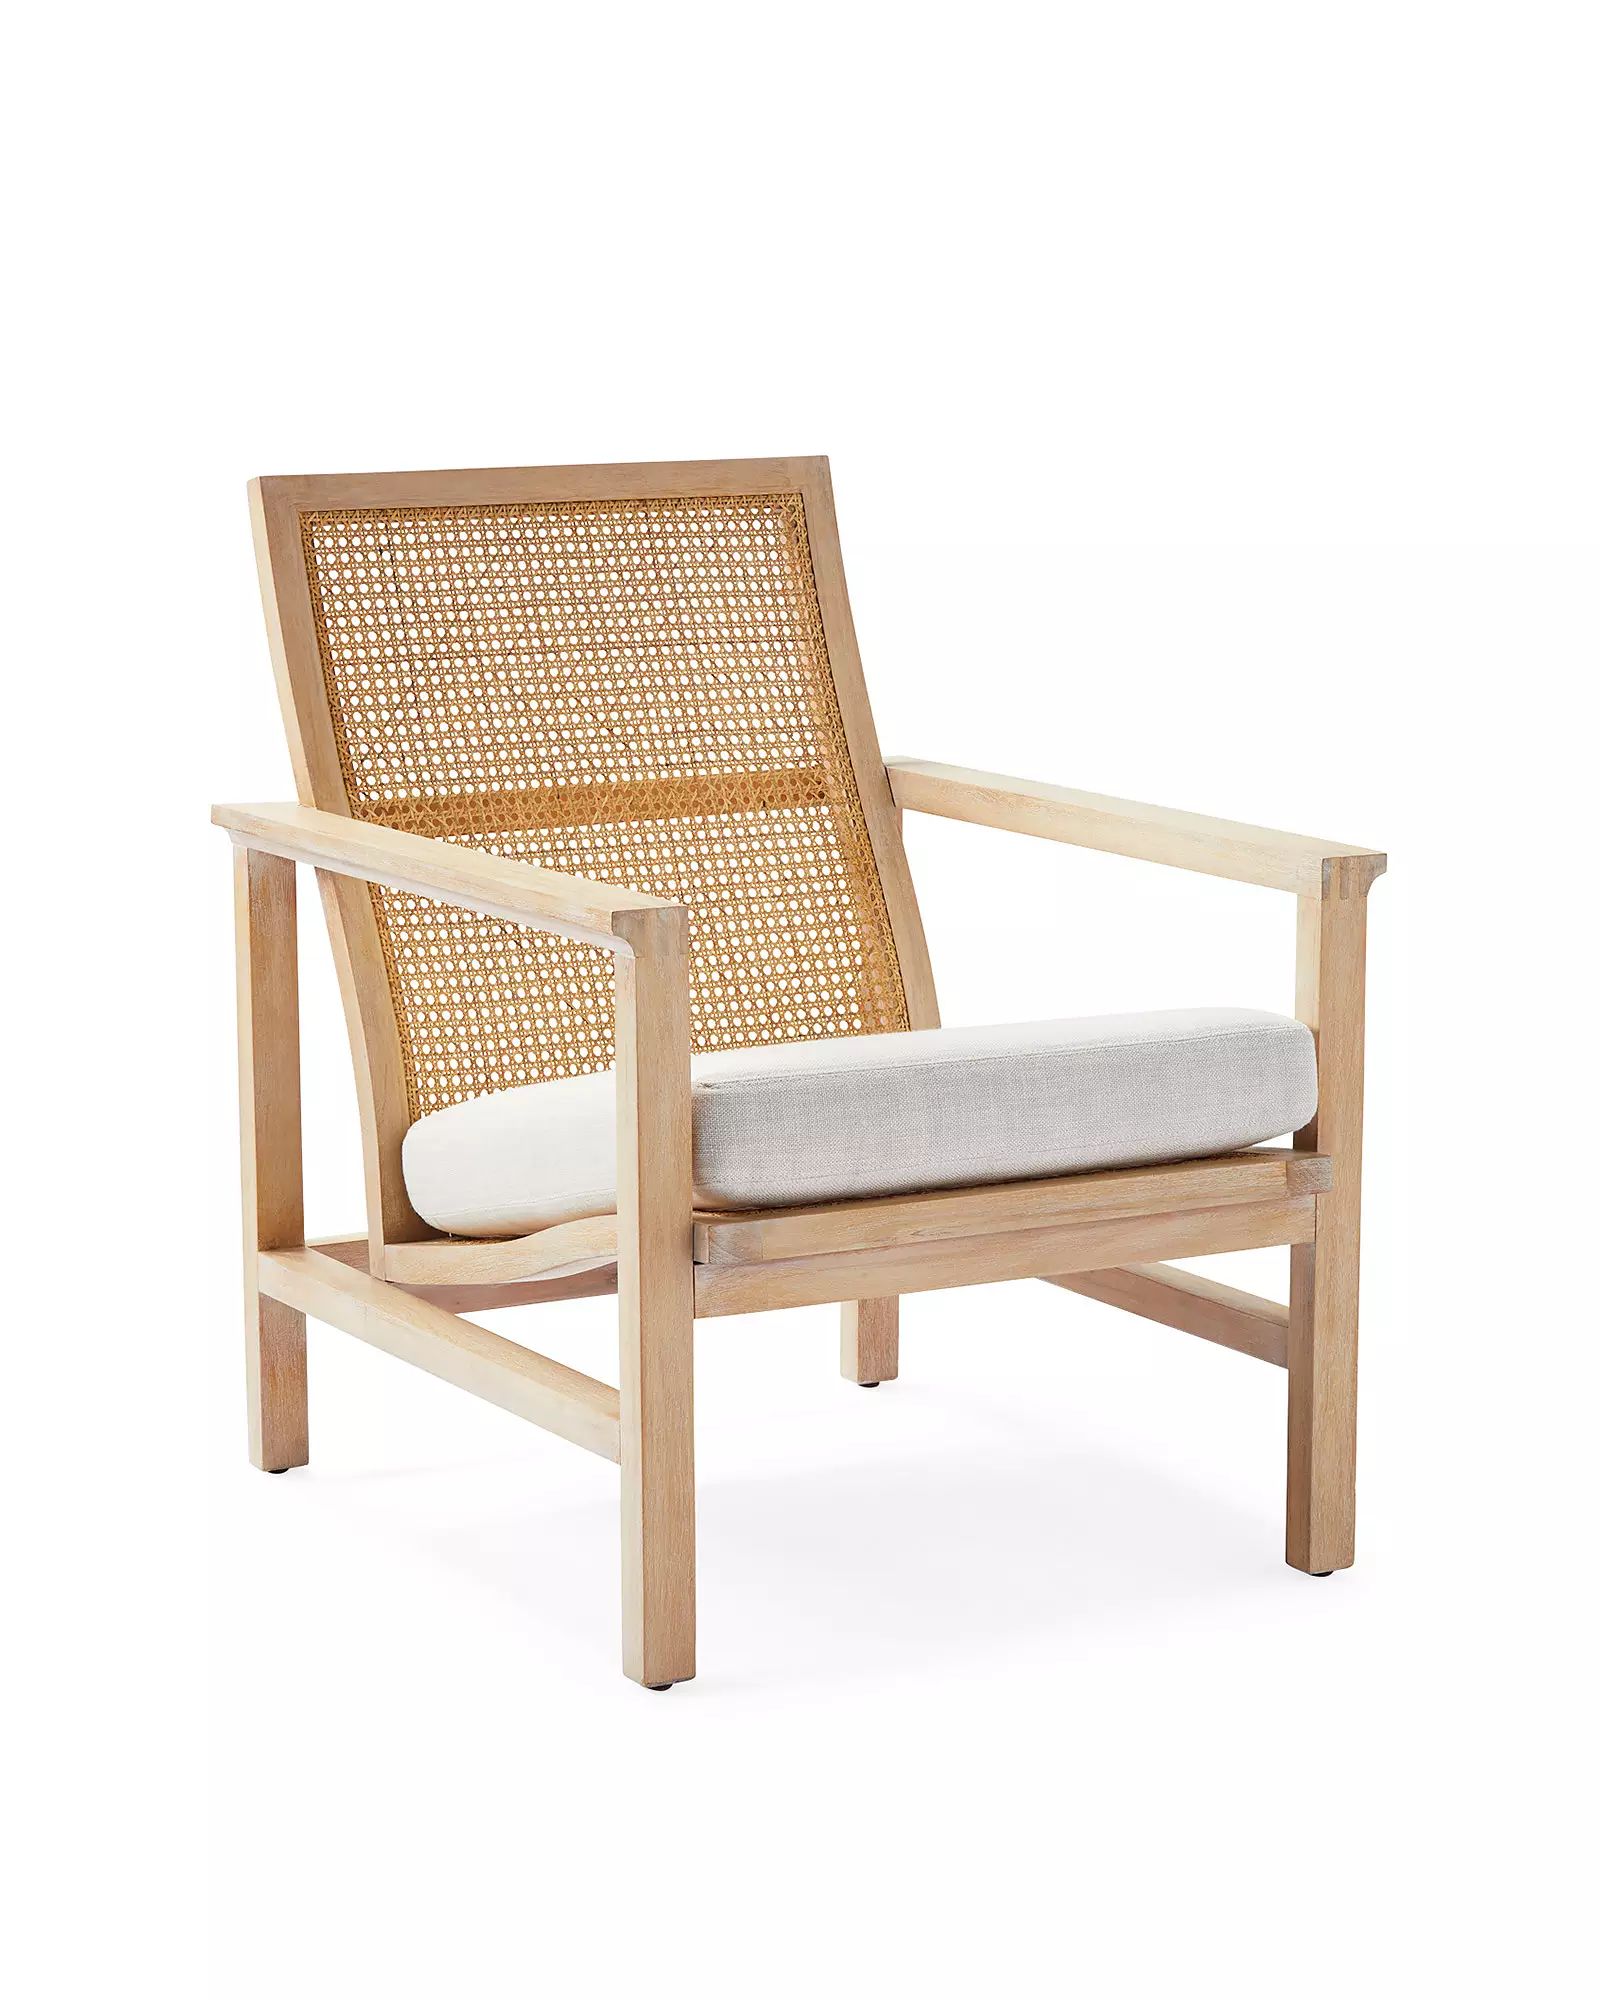 Georgica Lounge Chair | Serena and Lily